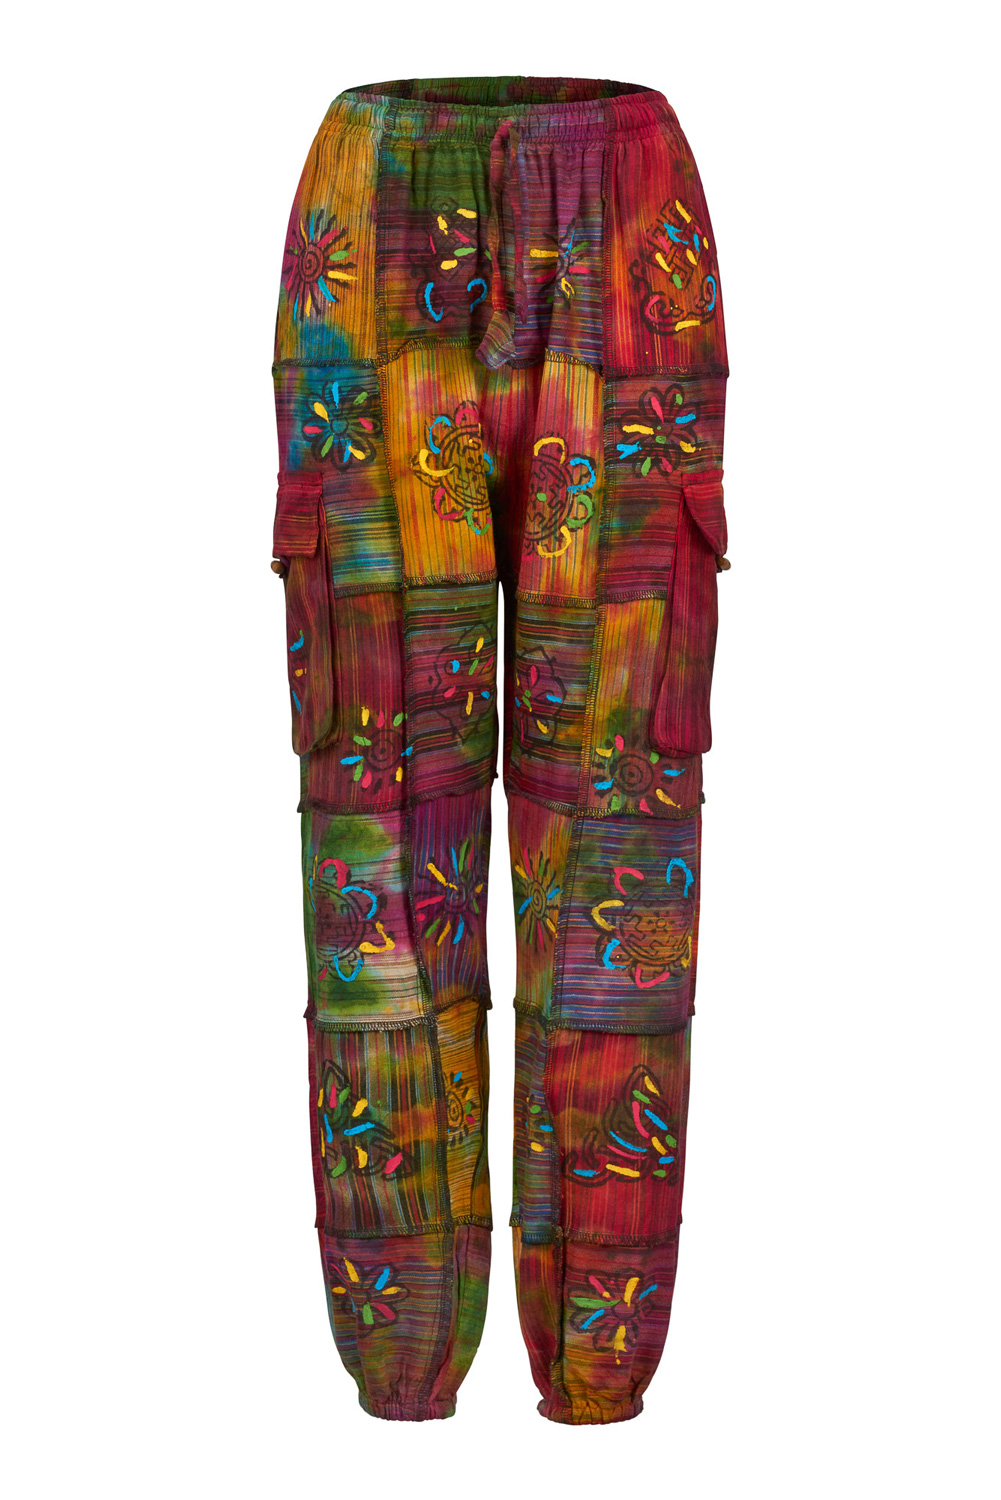 Fairtrade Multi Coloured Patchwork Hippie Trousers Pants | Soleil Store |  Boho outfits, Hippie outfits, Boho fashion